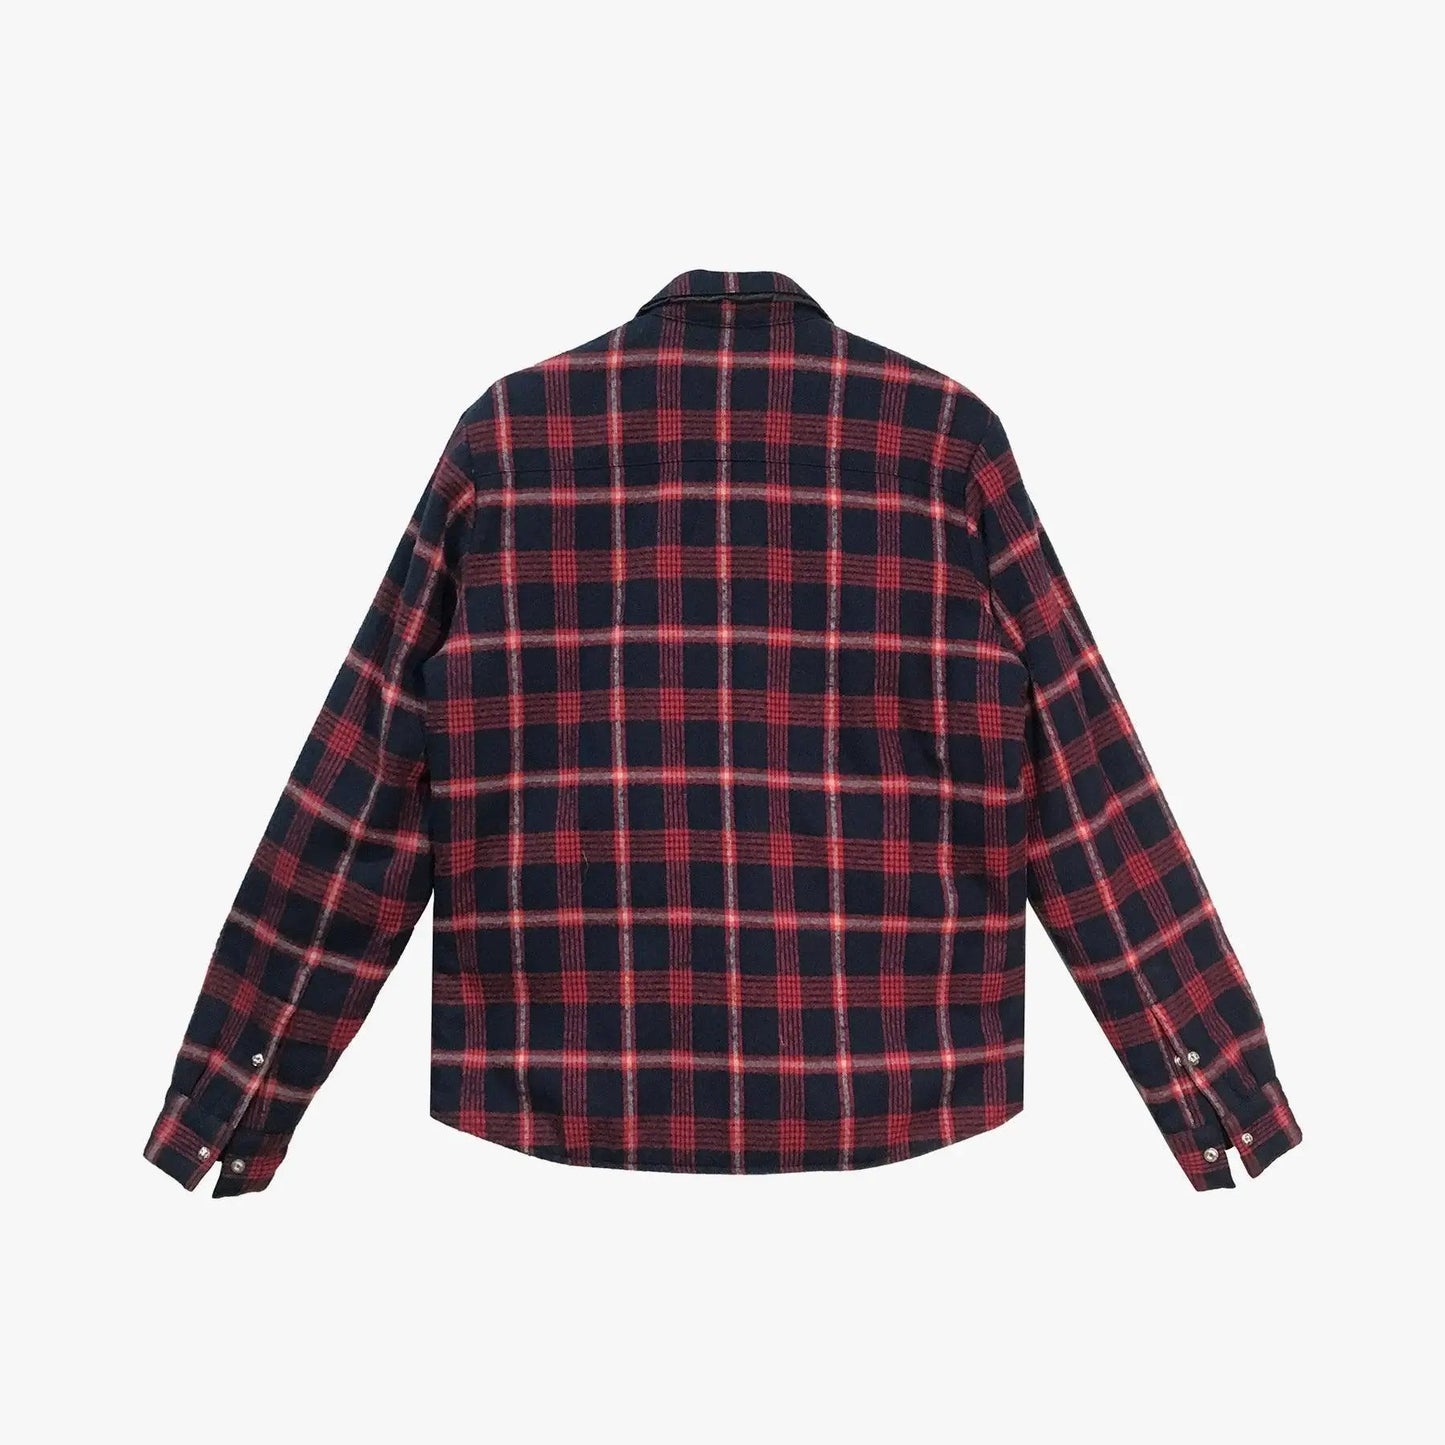 Chrome Hearts Red Plaid Reversible Quilted Jacket - SHENGLI ROAD MARKET